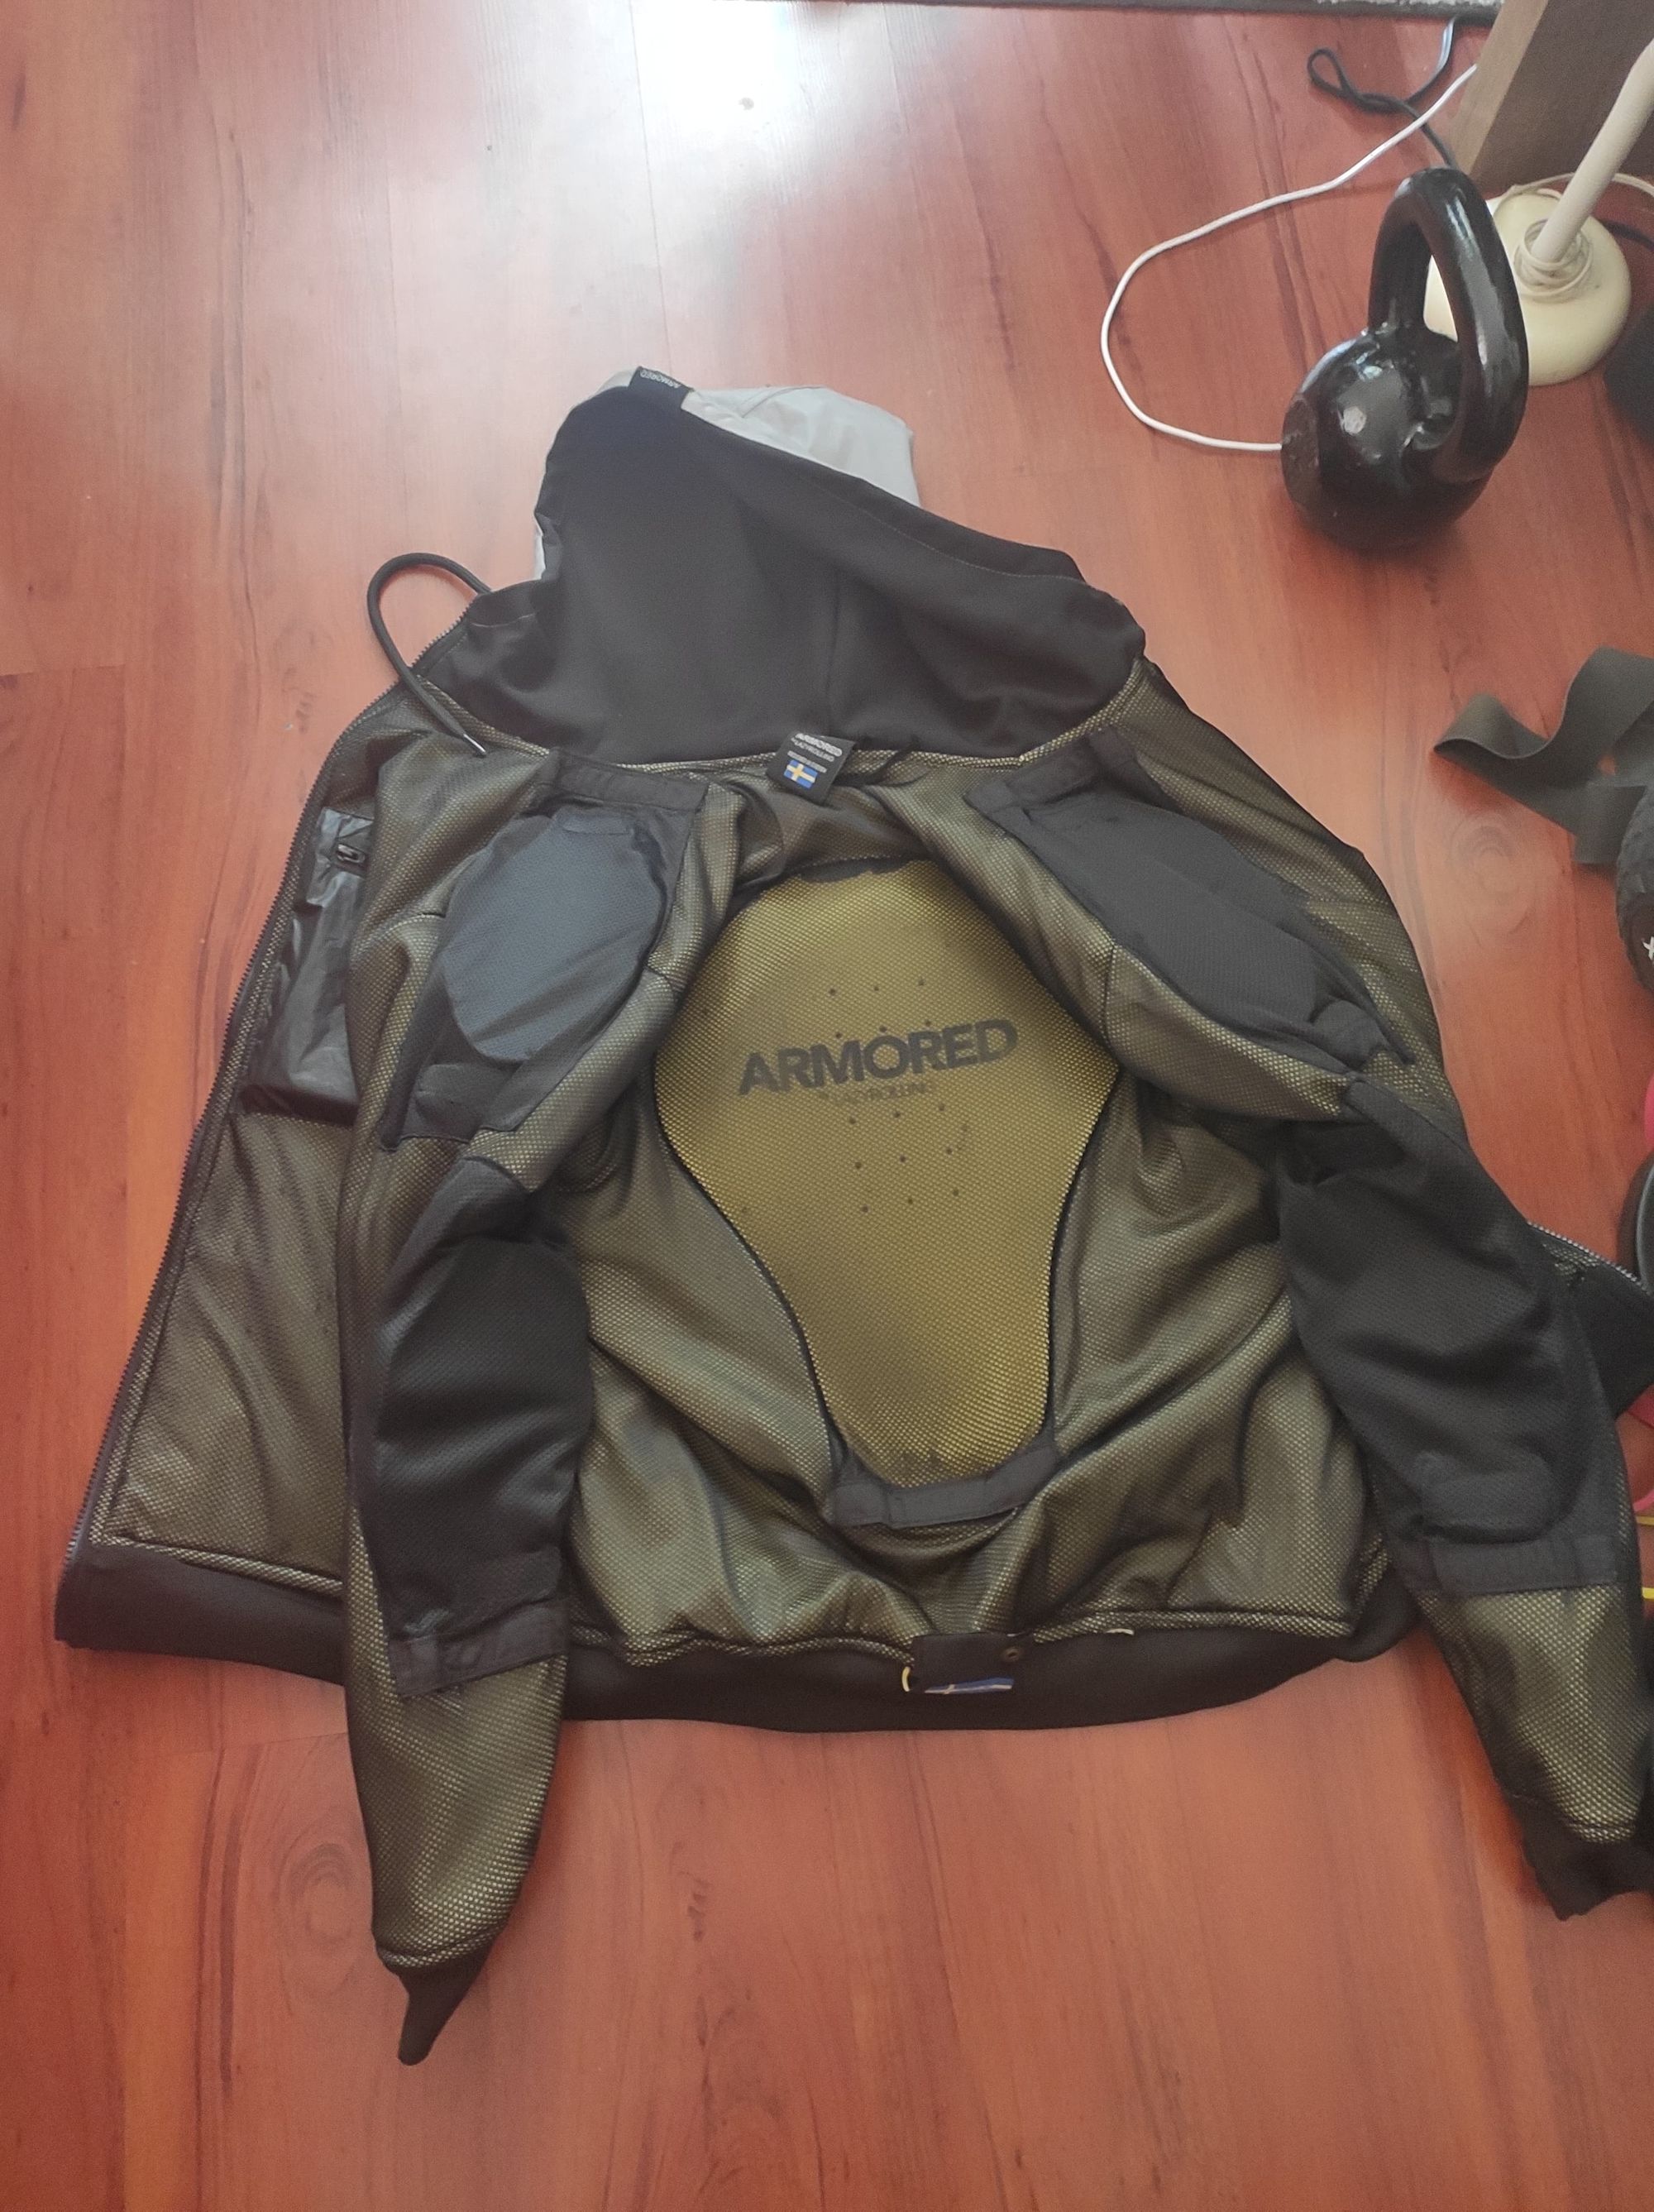 LAZYROLLING Armored Reflective Jacket First Impressions